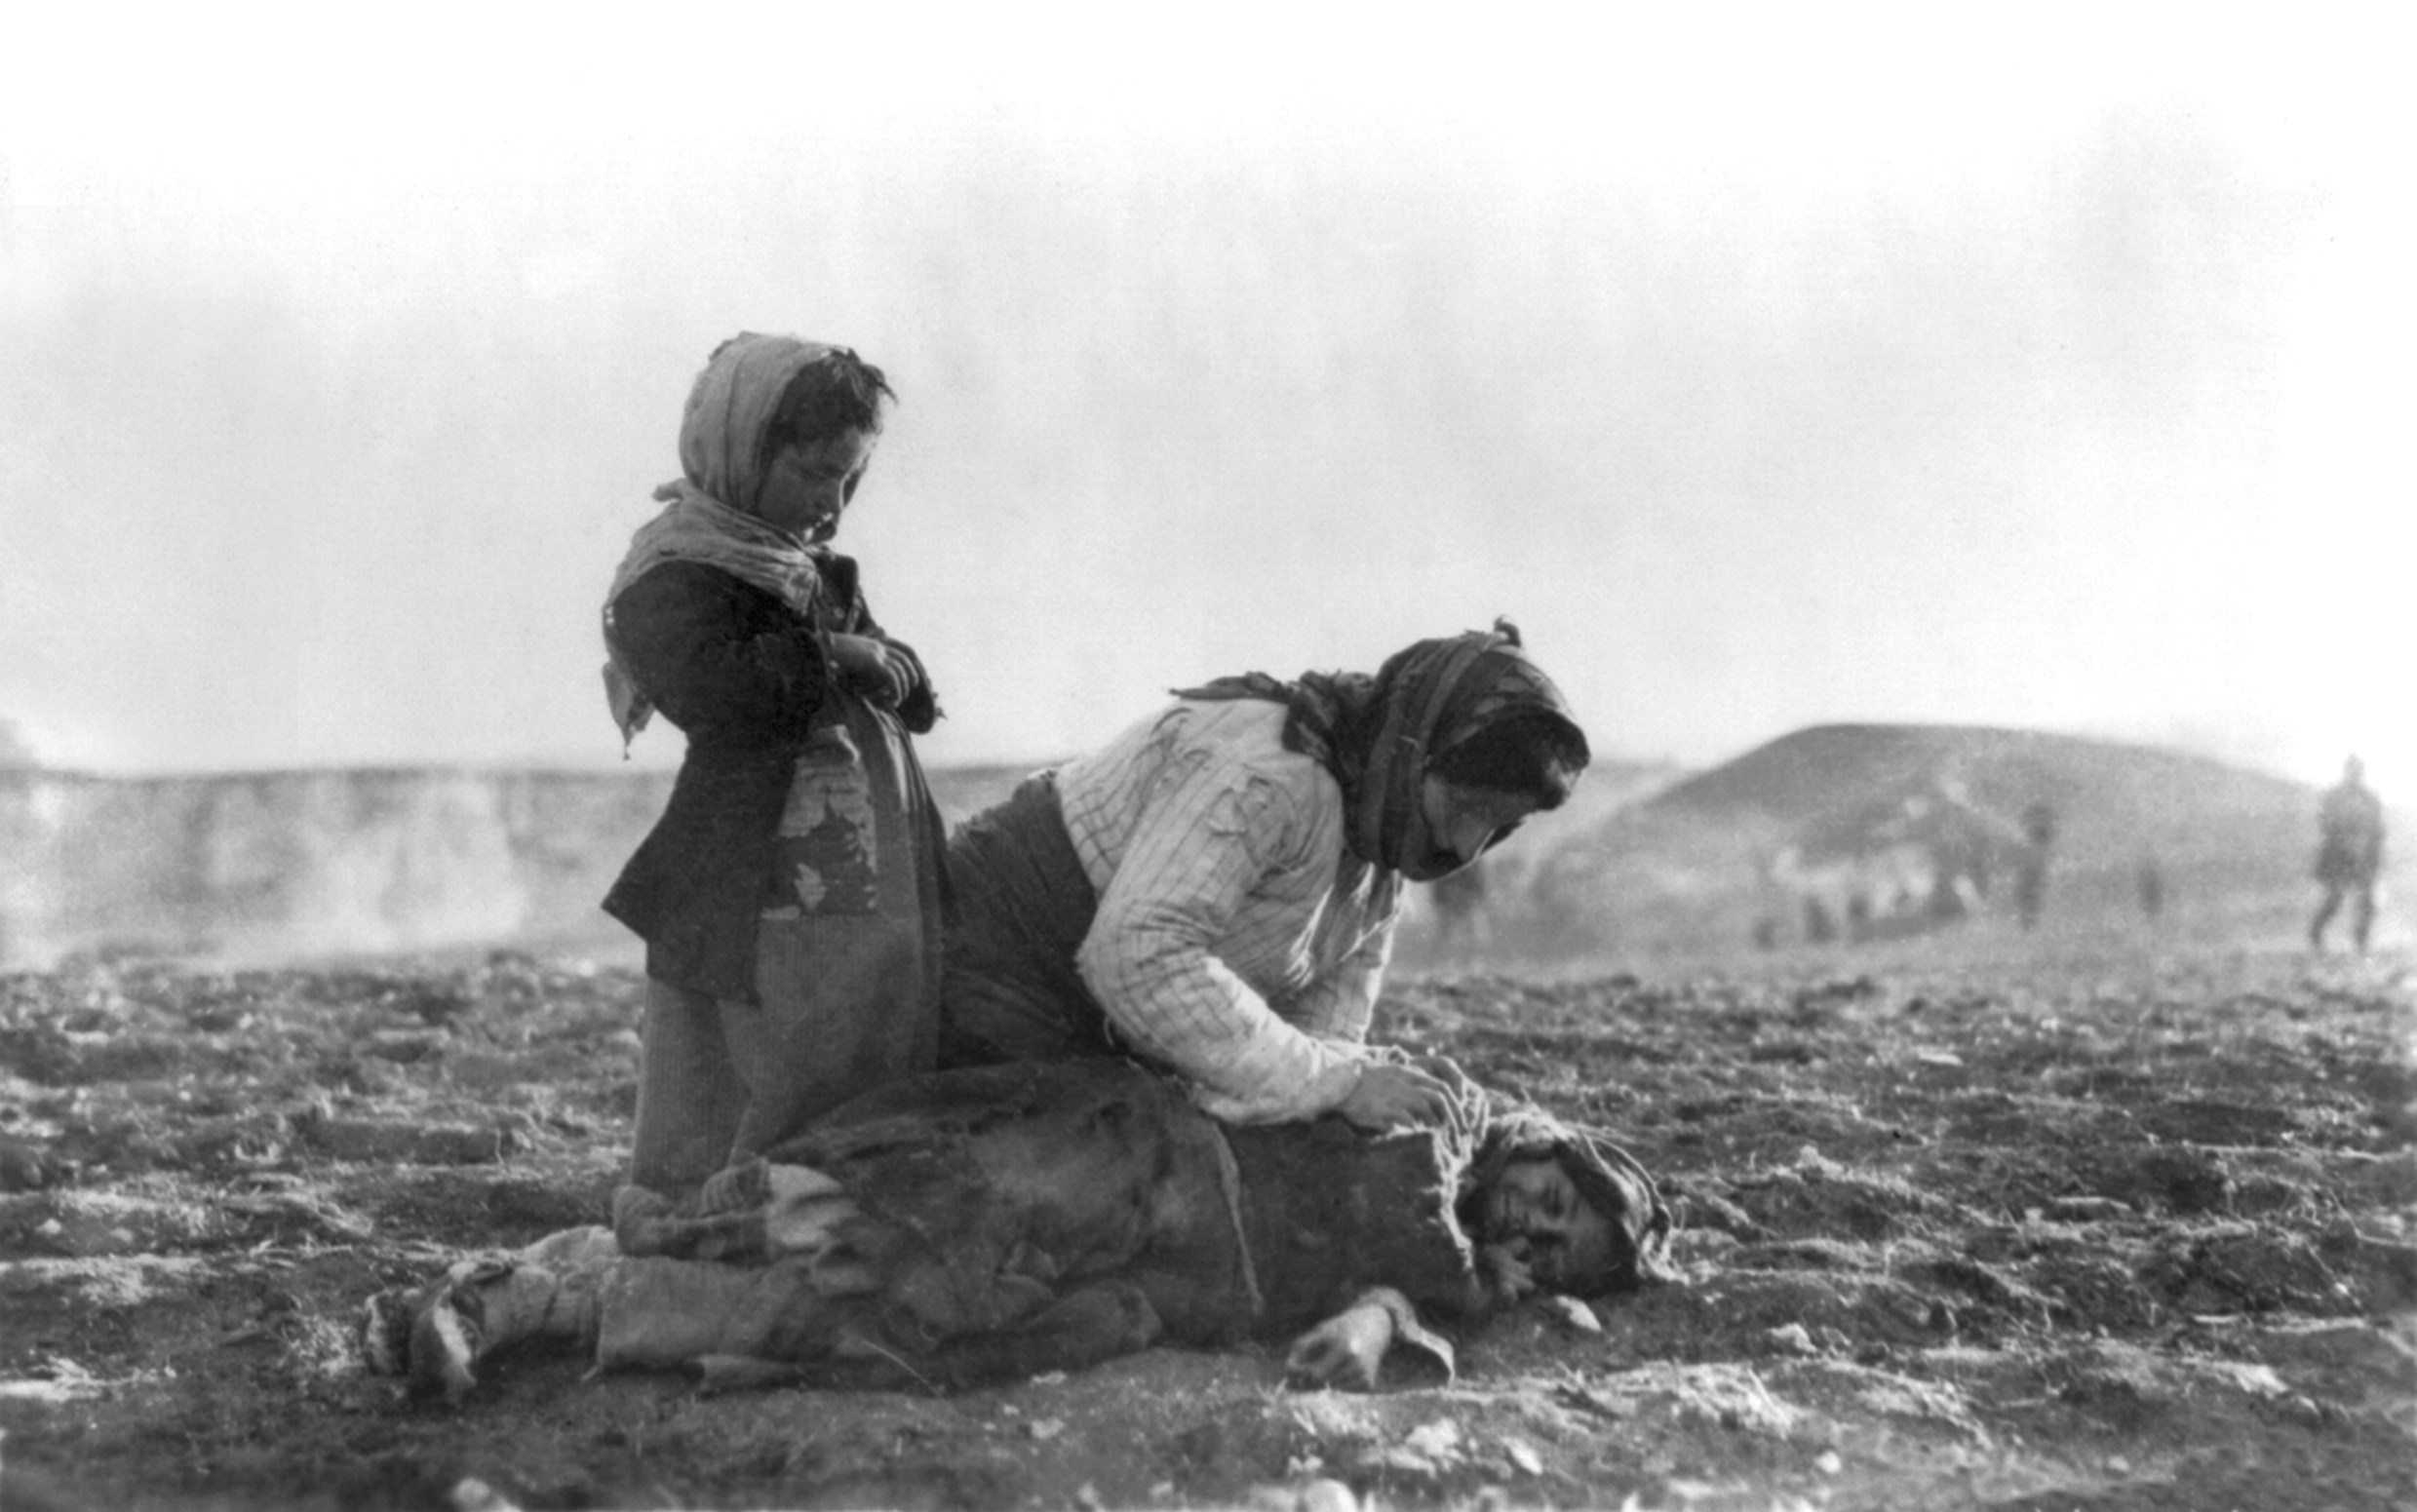 An Armenian woman kneeling beside a dead child in field "within sight of help and safety at Aleppo" (Credit: Wikicommons)